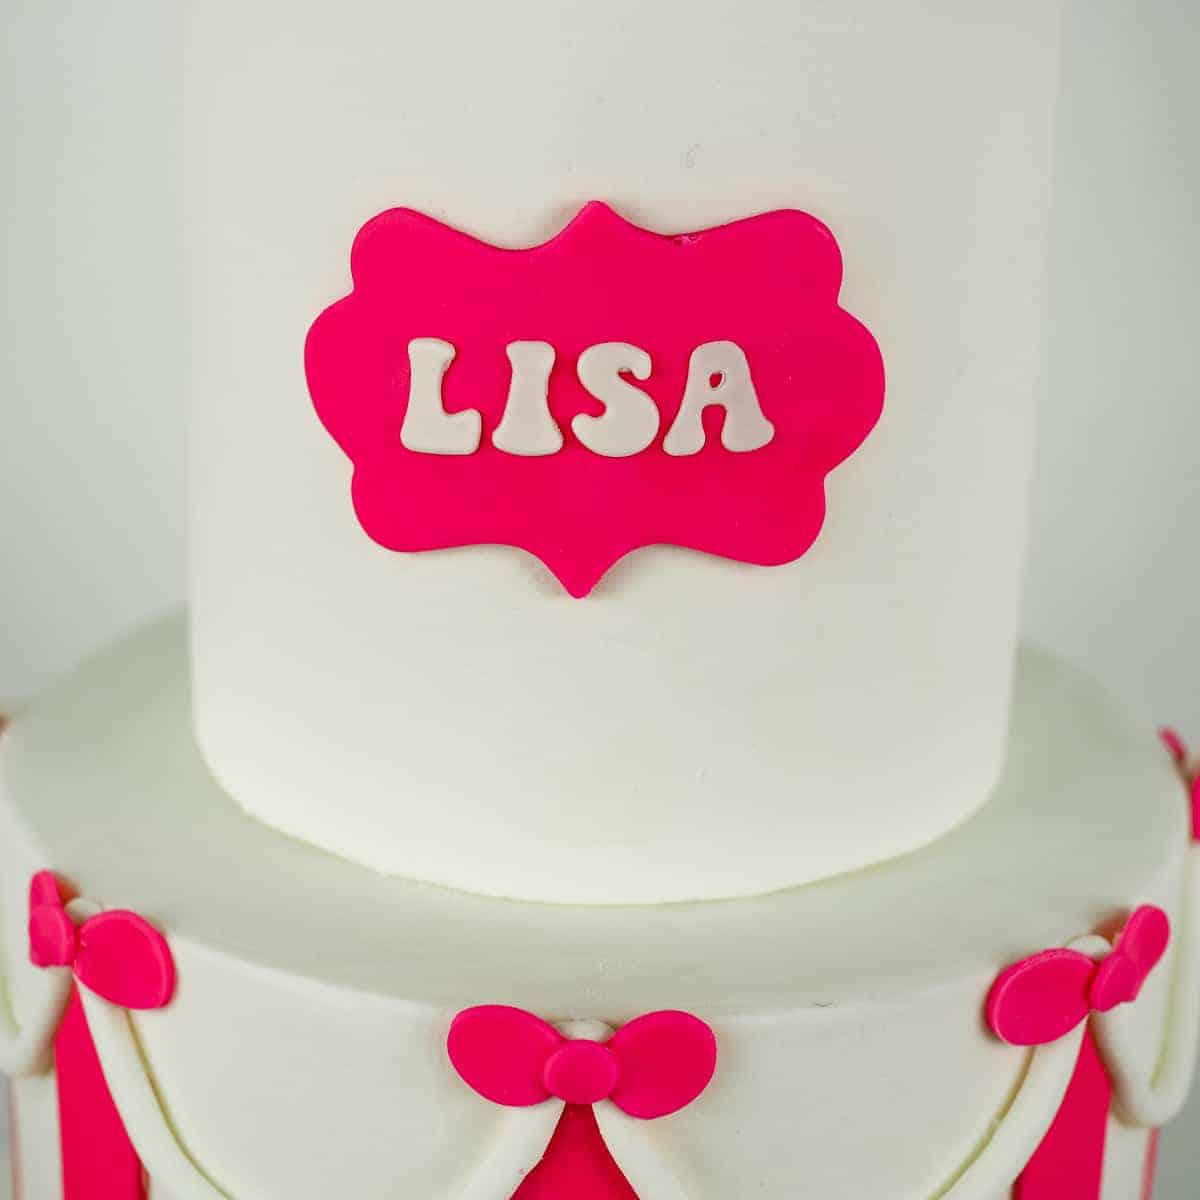 Cake Lettering - How to Center Letters on Cakes